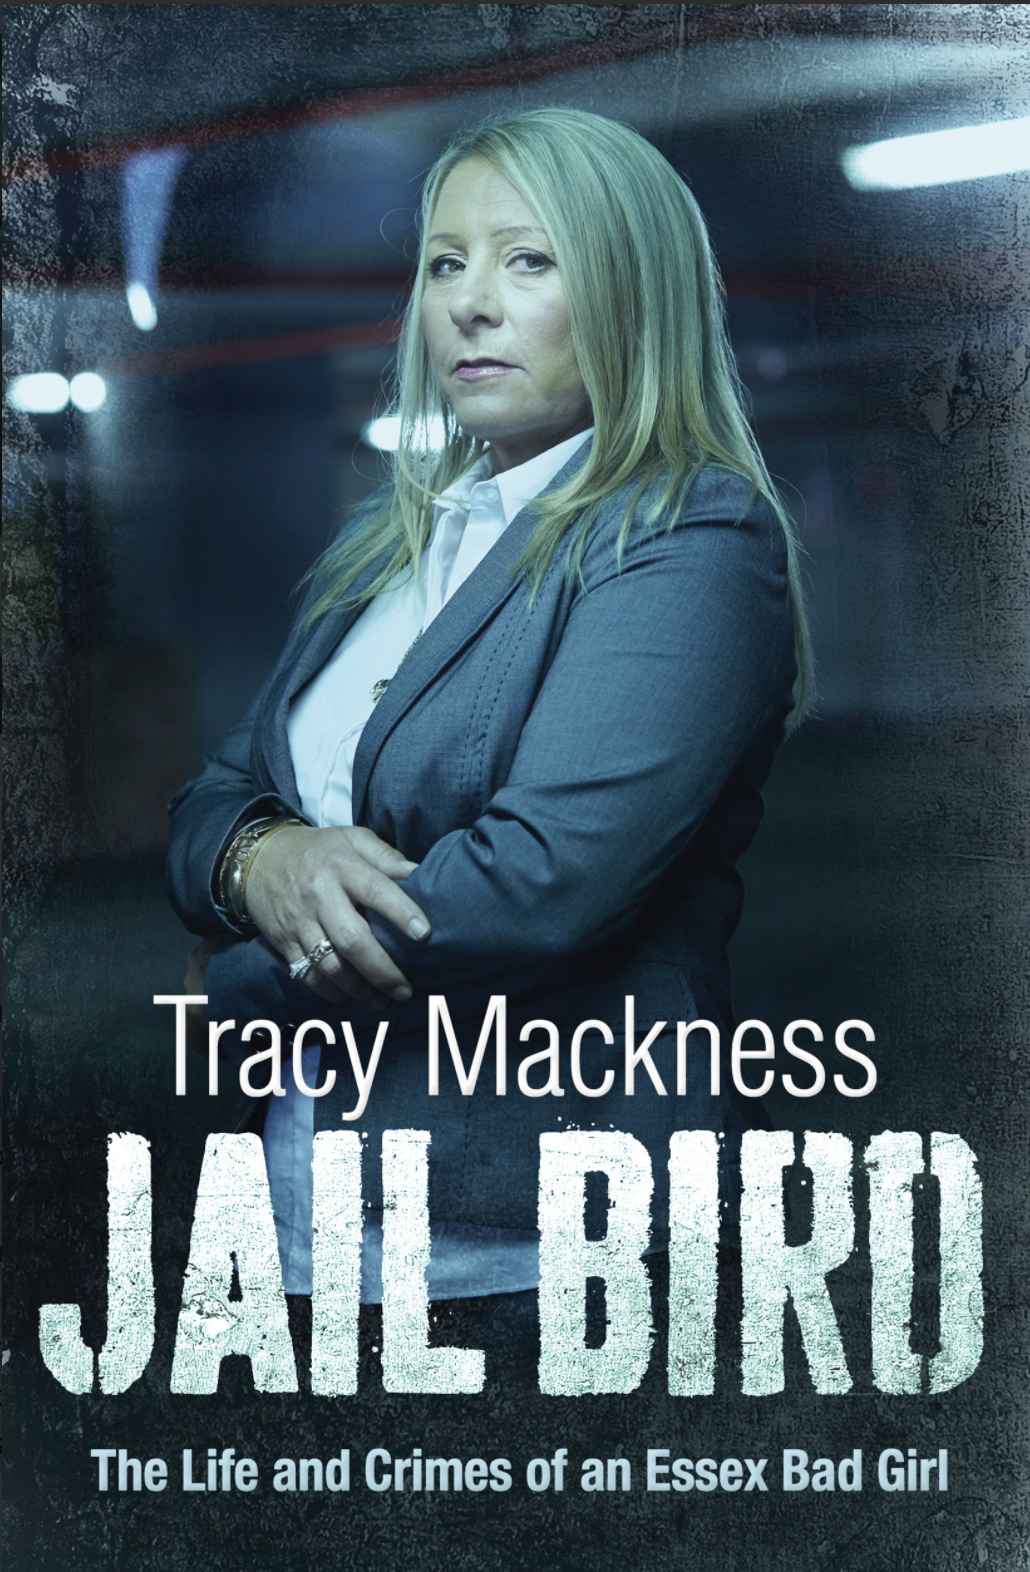 Tracy Mackness - The Life and Crimes of an Essex Bad Girl promotional poster.